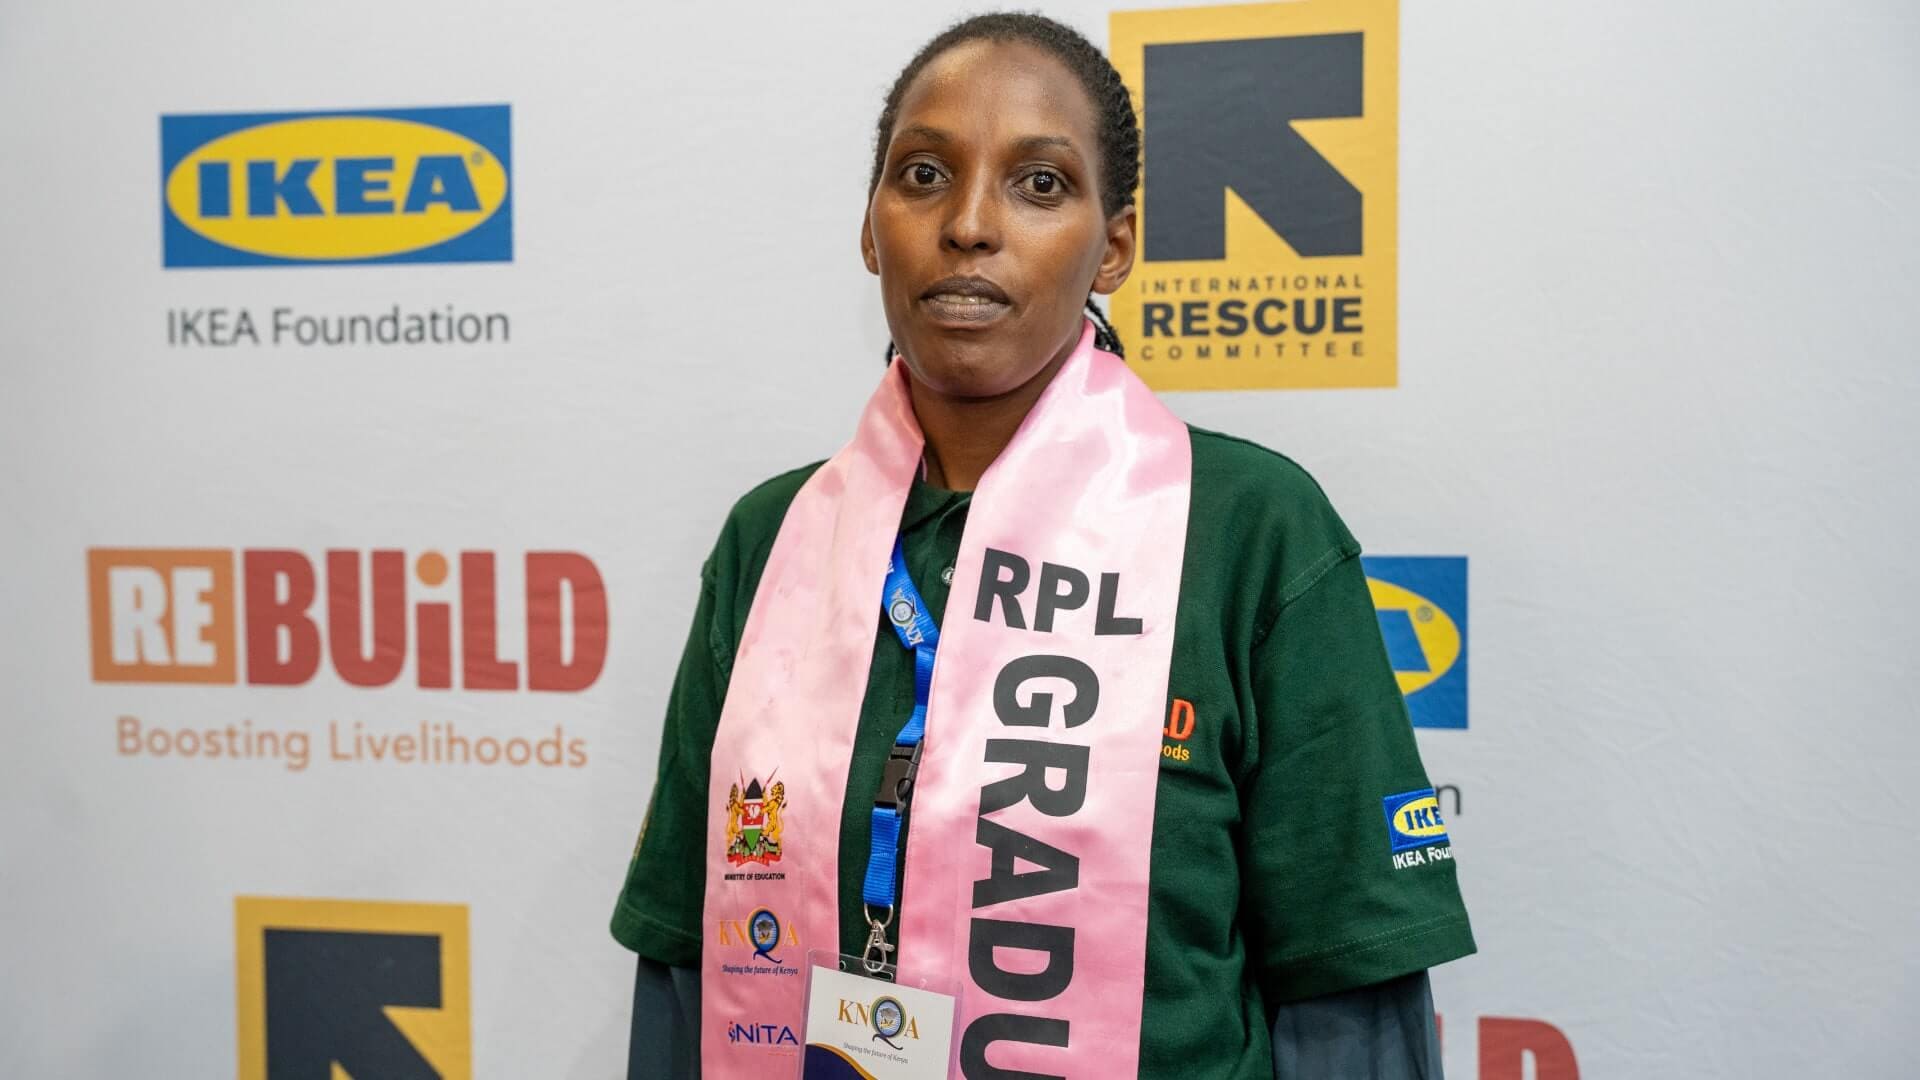 Mirel - an RPL graduate through Re:BUiLD poses for a photo at the RPL graduation ceremony in Nairobi